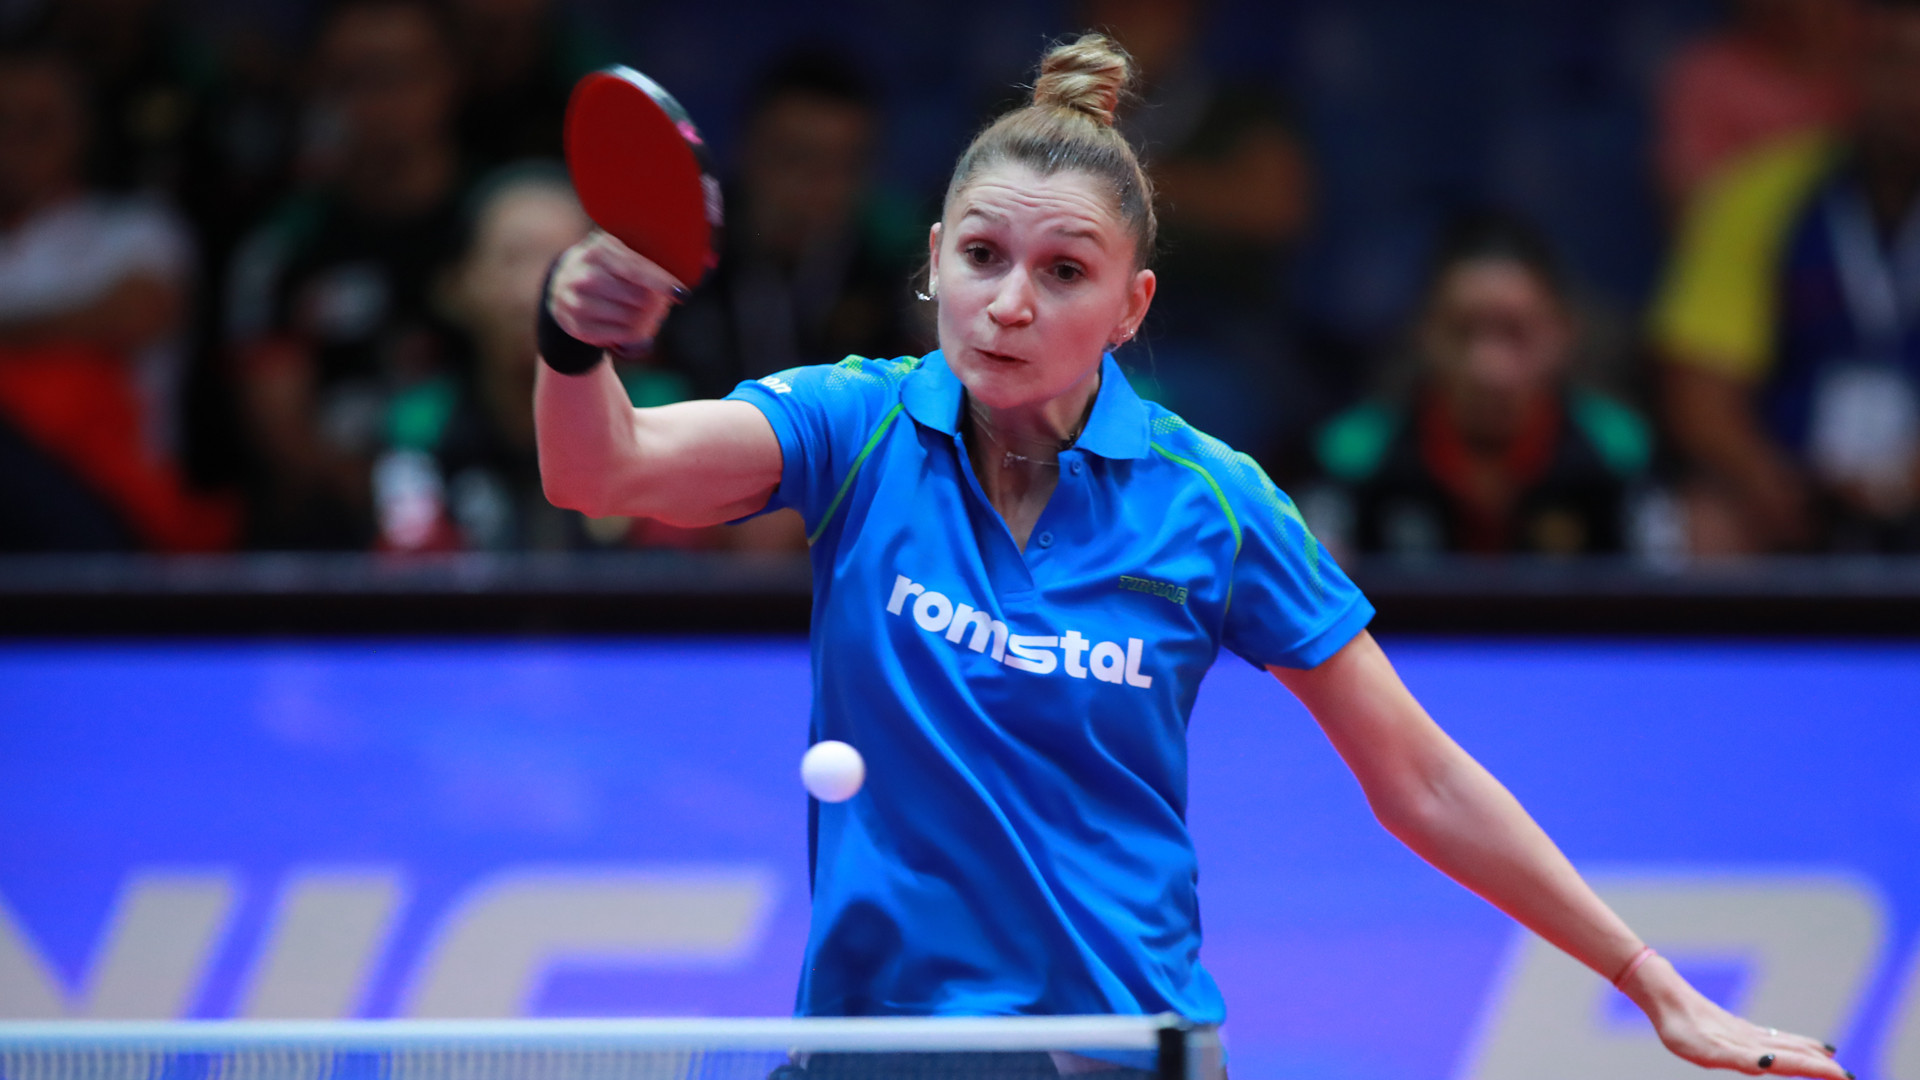 Victory for Daniela Monteiro Dodean in the deciding match handed Romania the gold ©ITTF